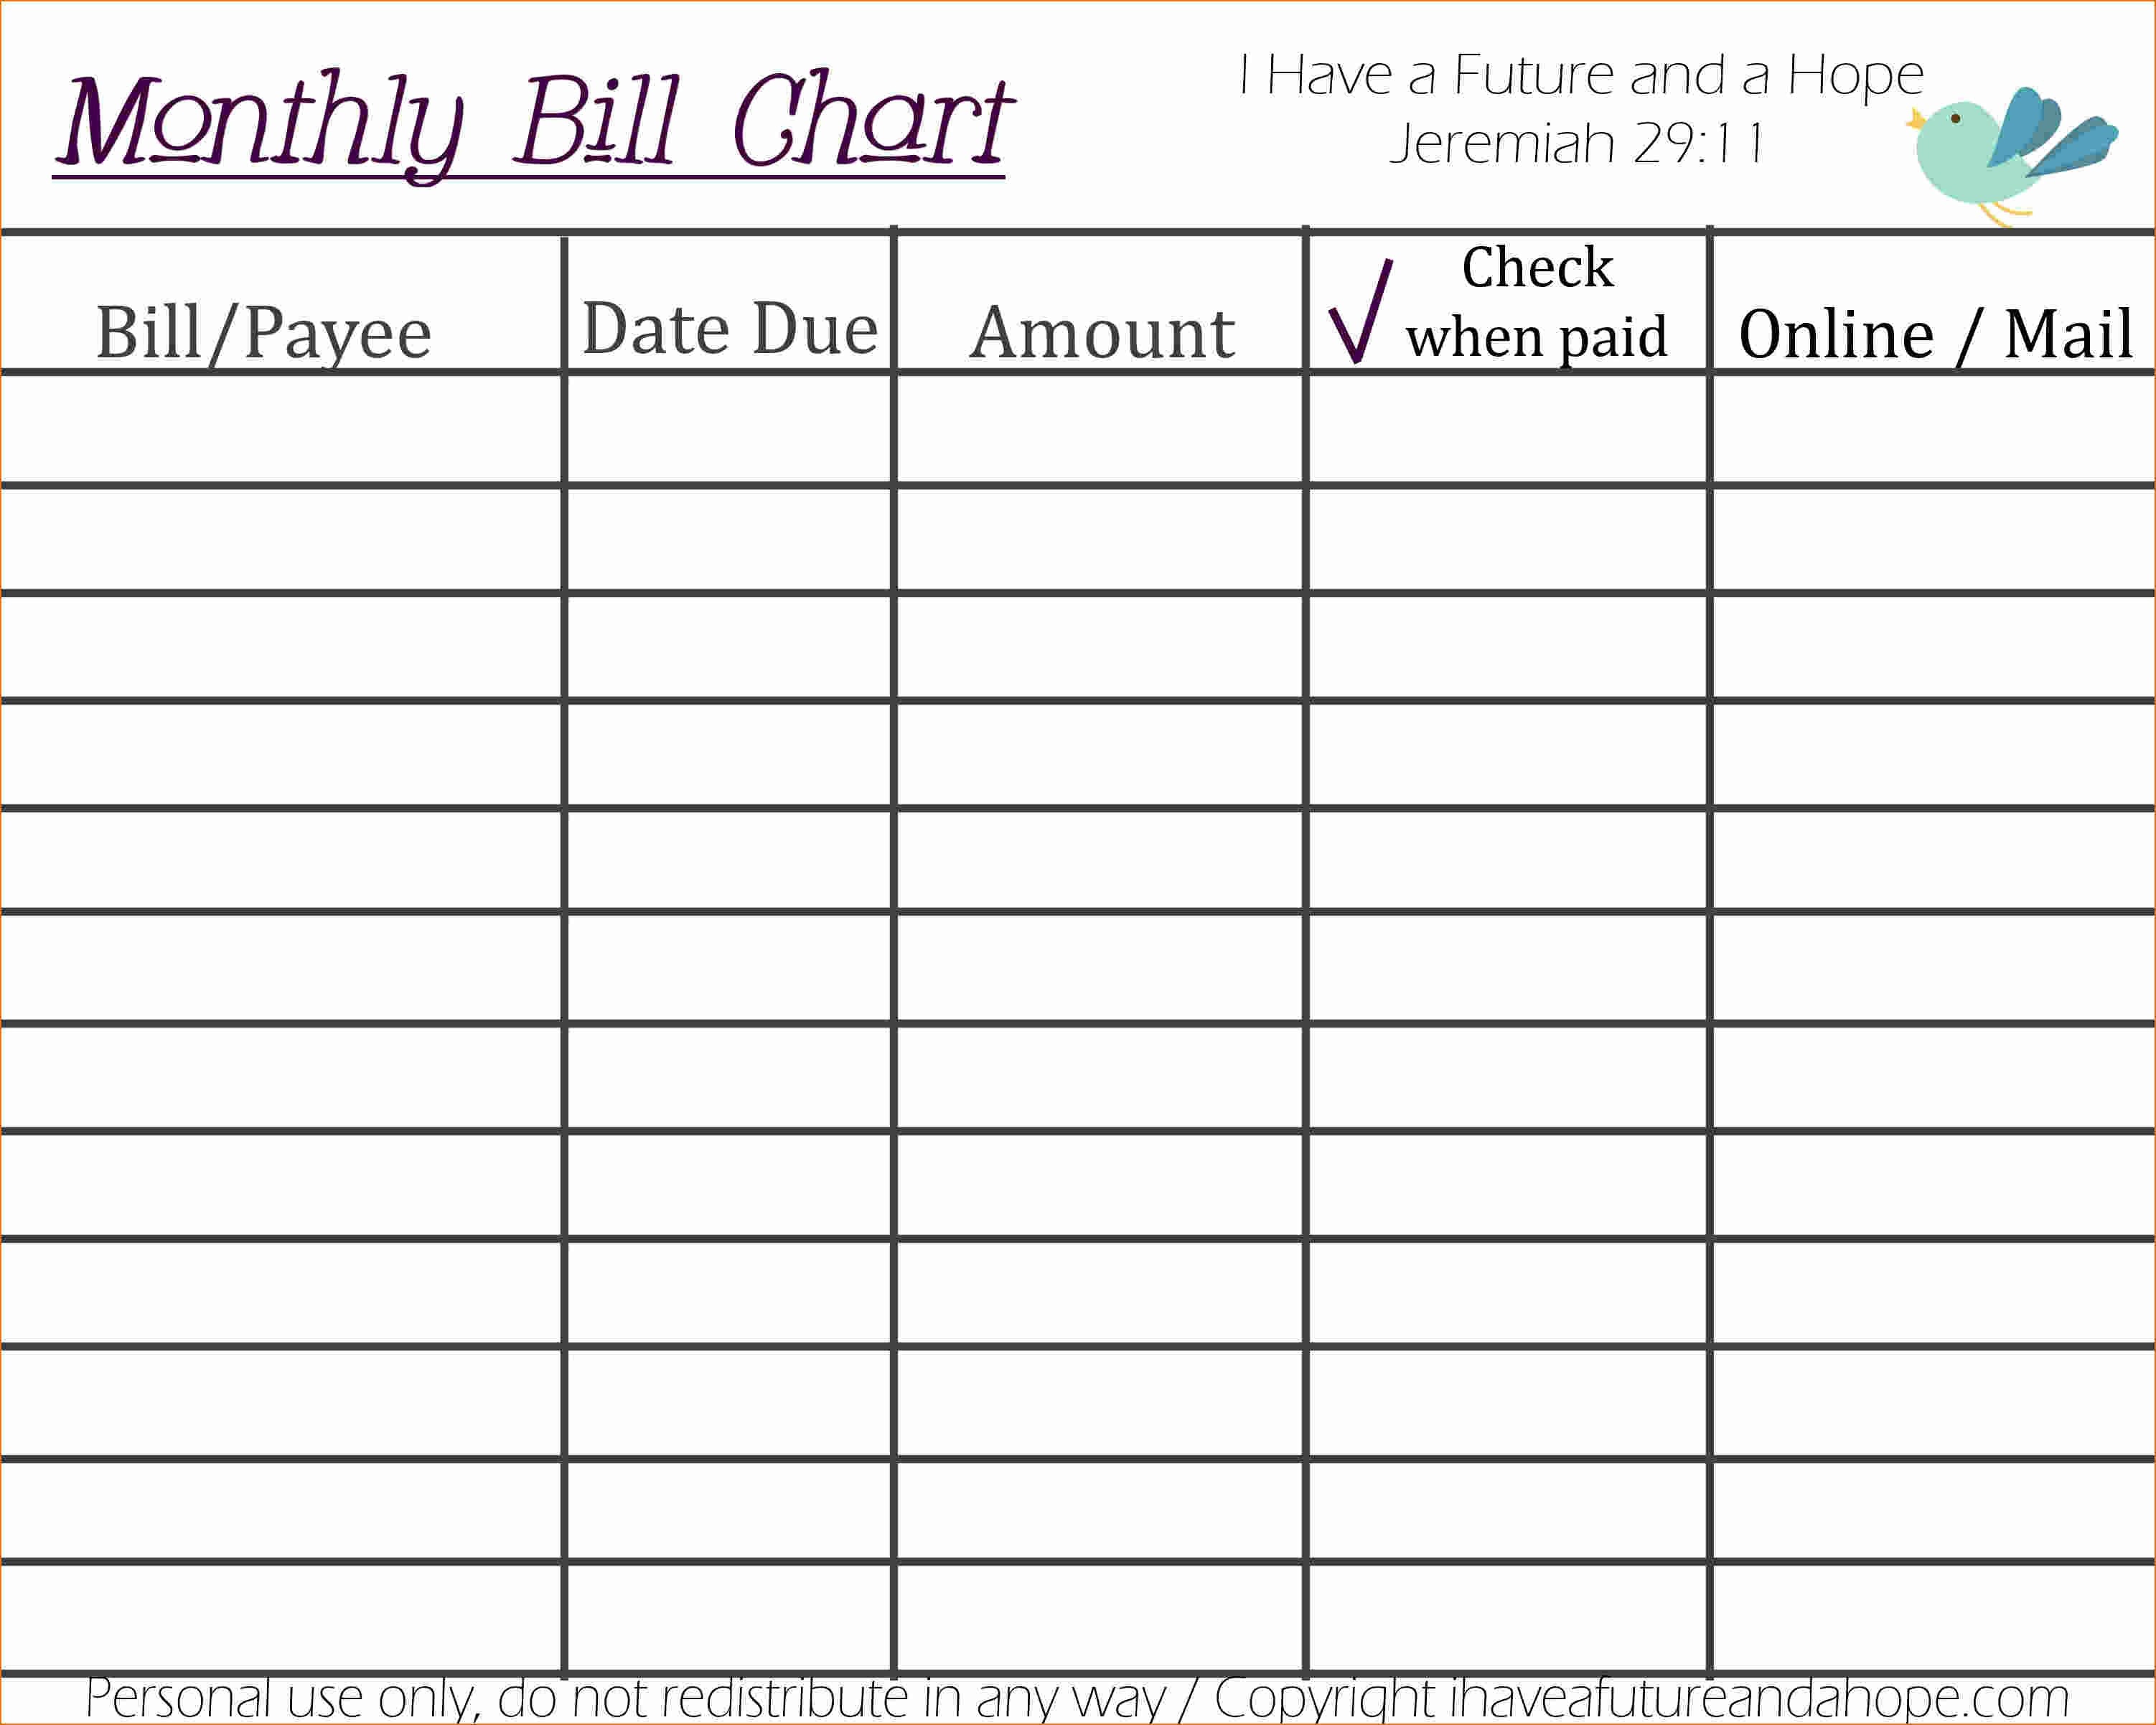 Free Printable Bill Organizer (79+ Images In Collection) Page 1 - Free Printable Bill Organizer